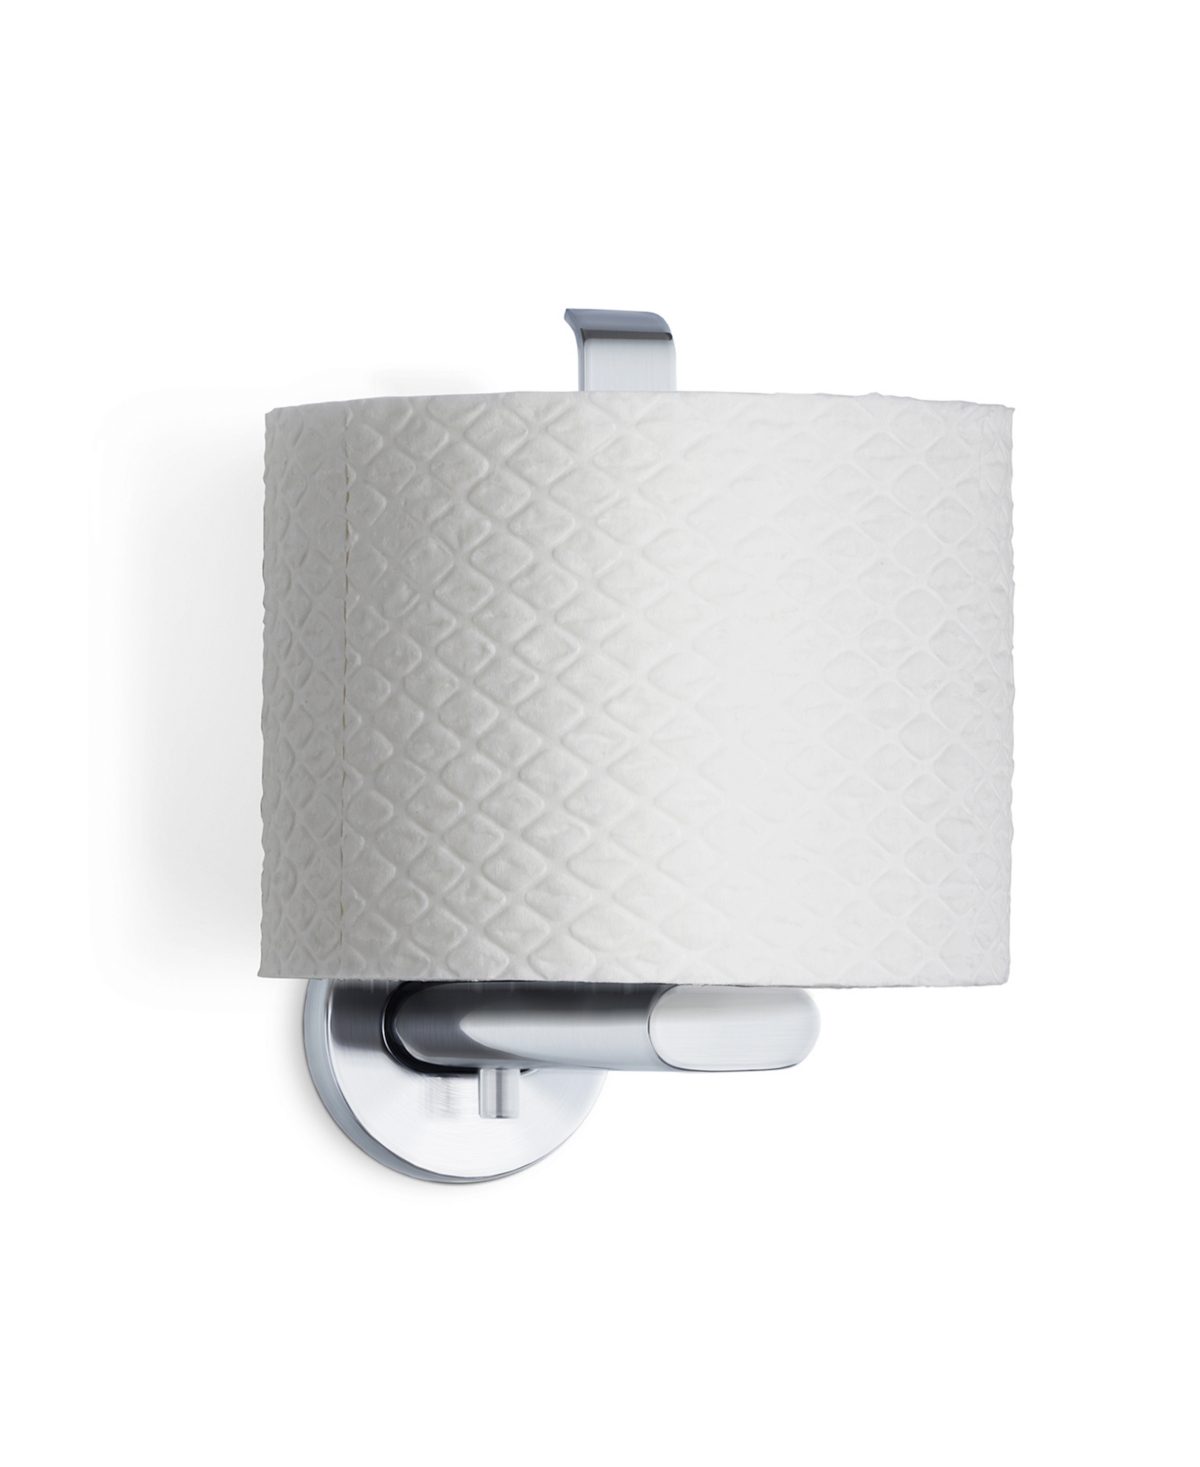 blomus Wall Mounted Toilet Paper Holder - Vertical - Areo Bedding